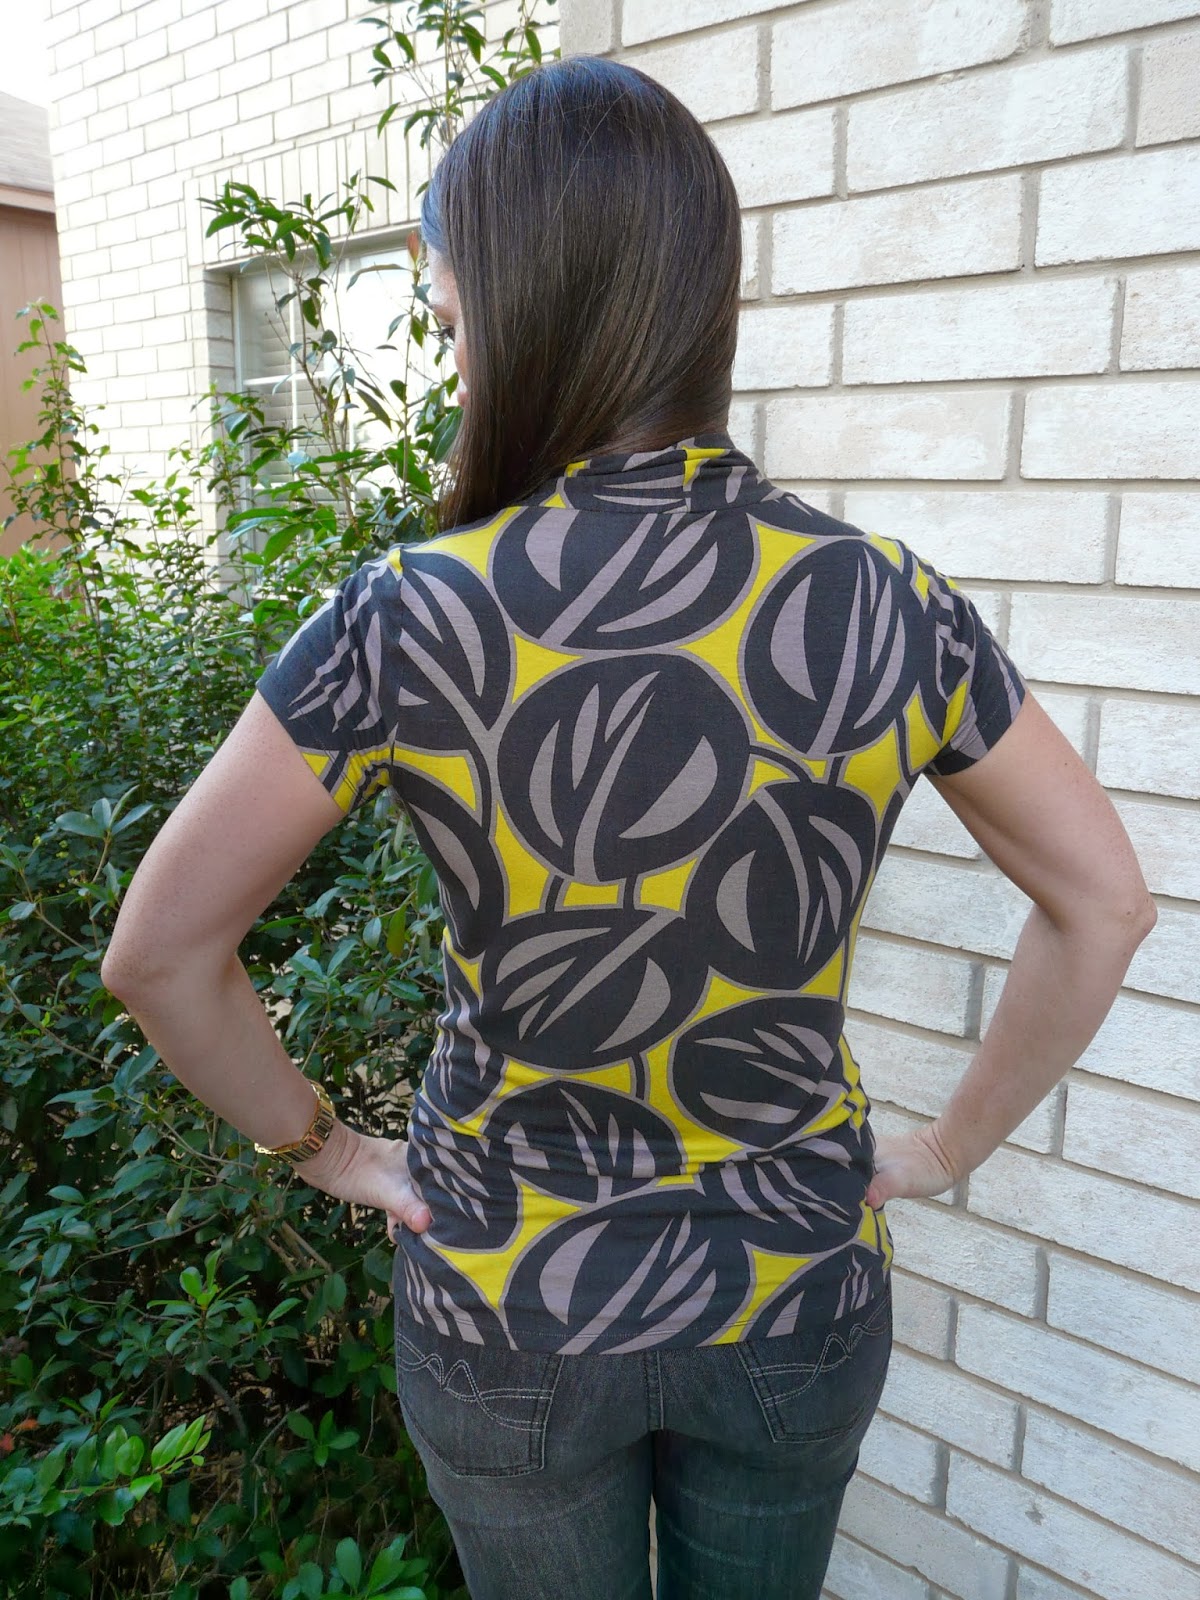 Amanda's Adventures in Sewing: Jalie 2921 - Short sleeve yellow, taupe ...